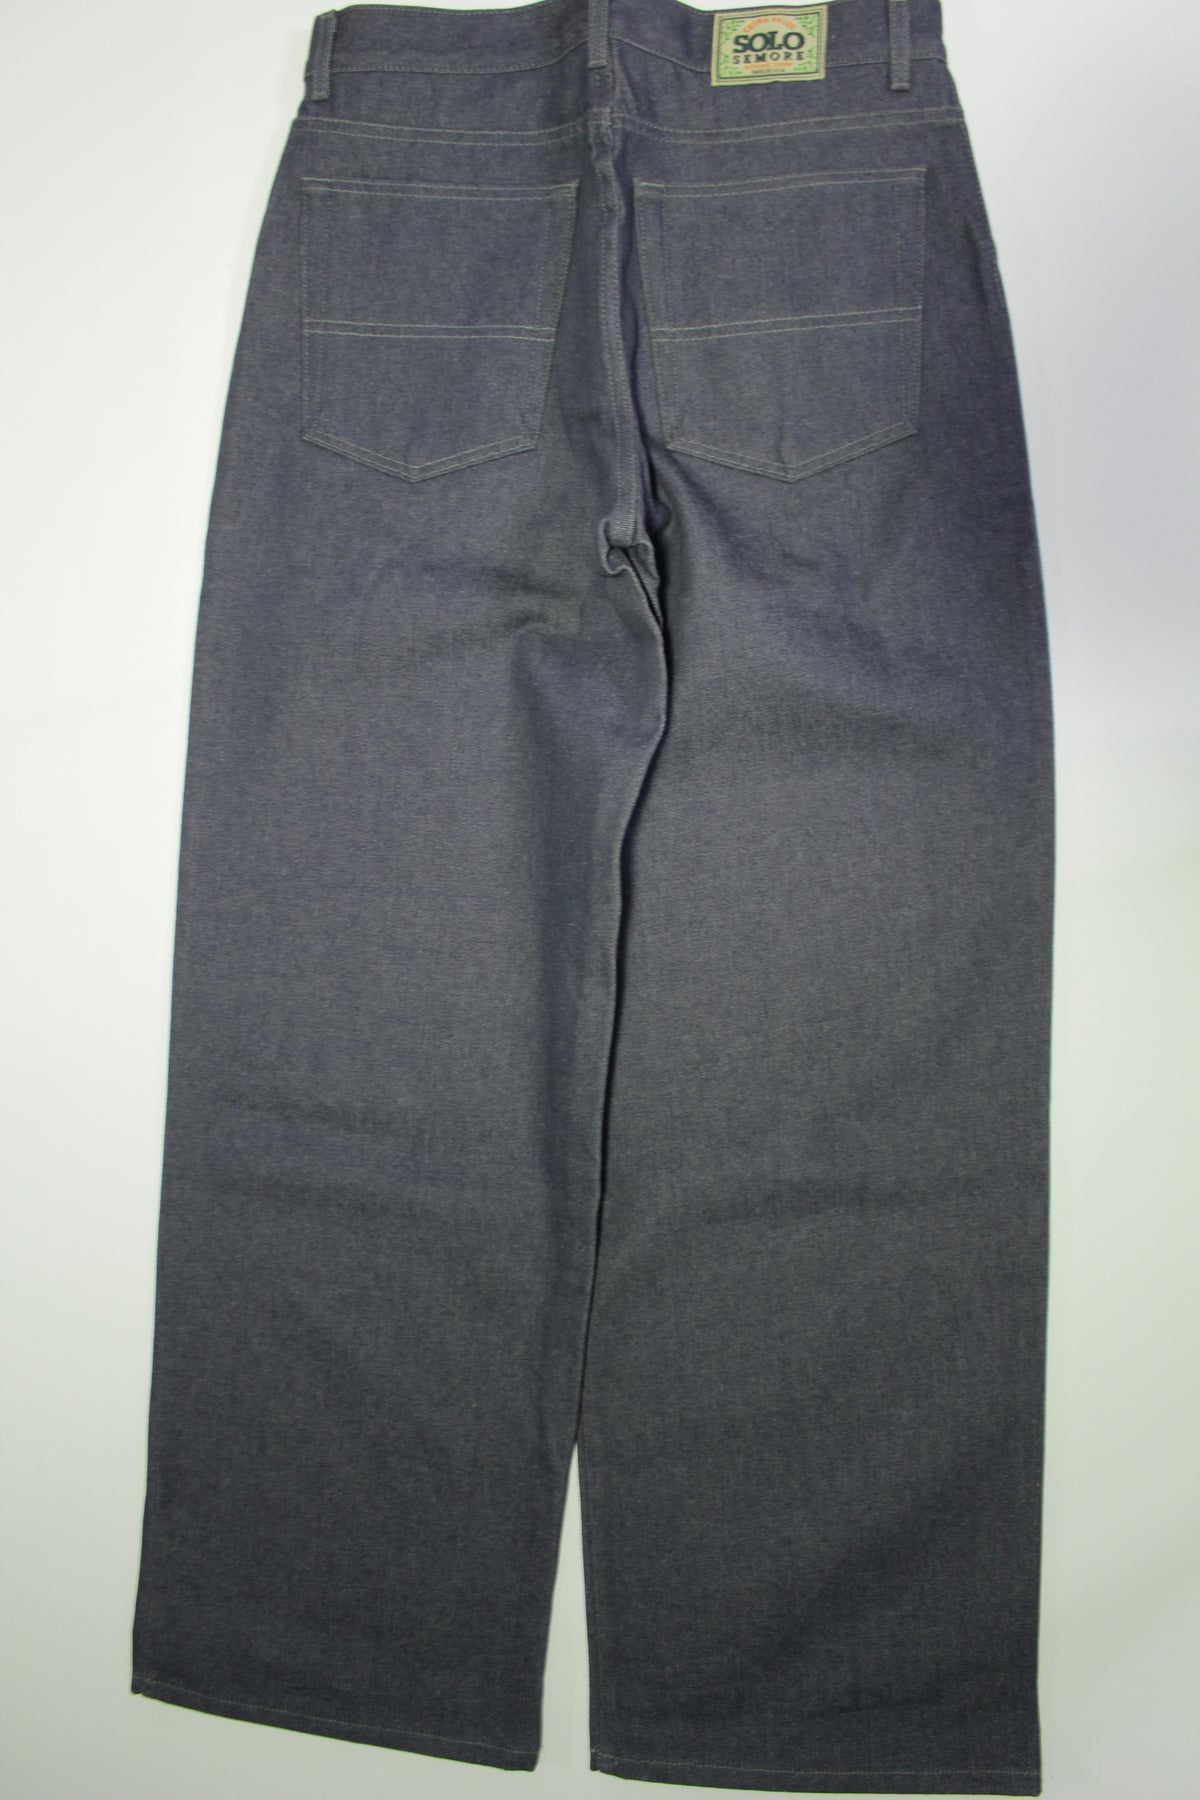 Solo Semore Made in USA Vintage 90's Skater Wide Leg Authentic Denim Baggy Hip Hop Jeans